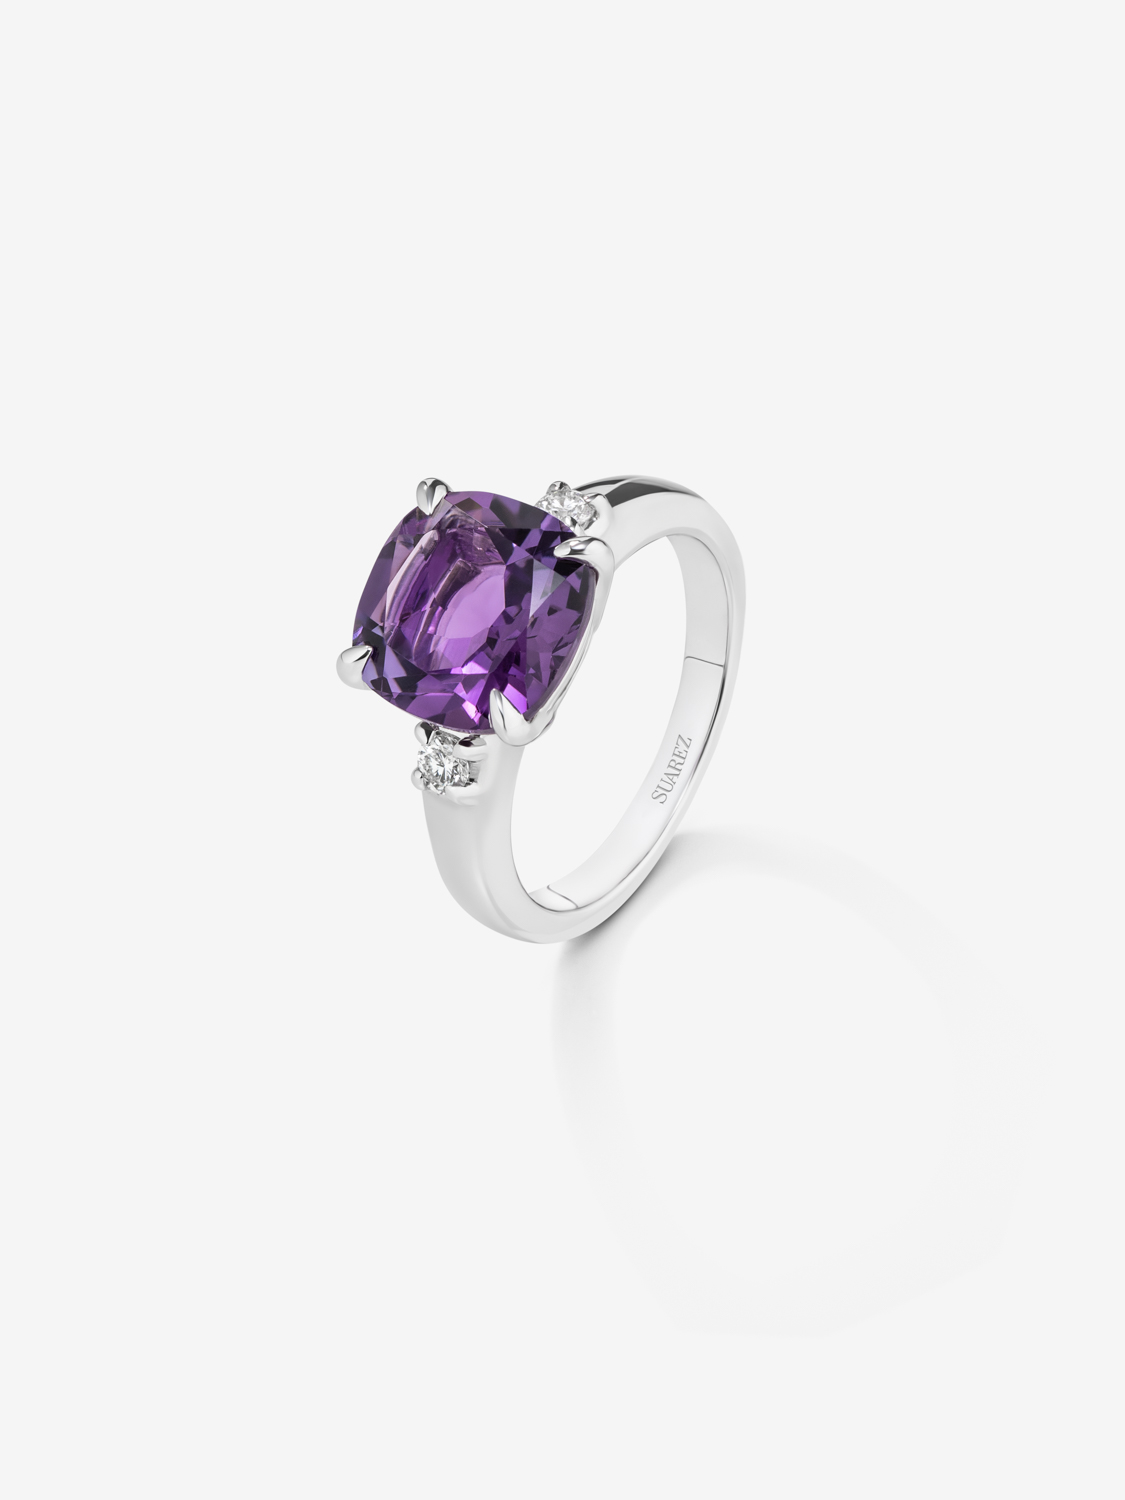 925 Silver Trilogy Ring with Amethyst and Diamonds